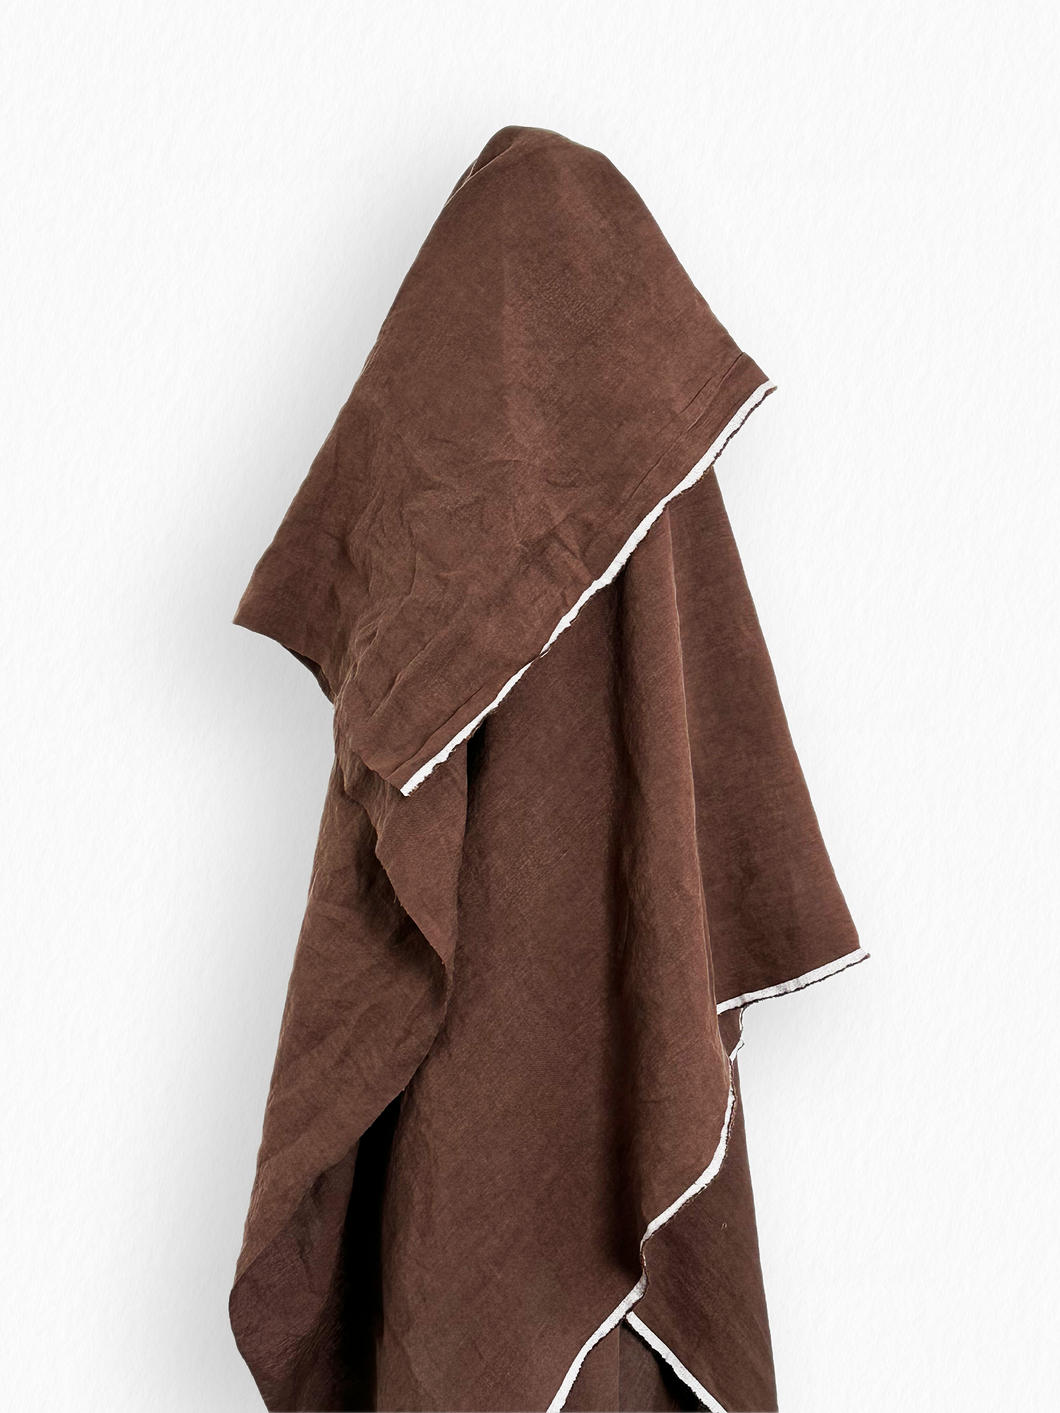 Chocolate Vintage Finish Piece Washed 100% Linen 180gsm $40pm